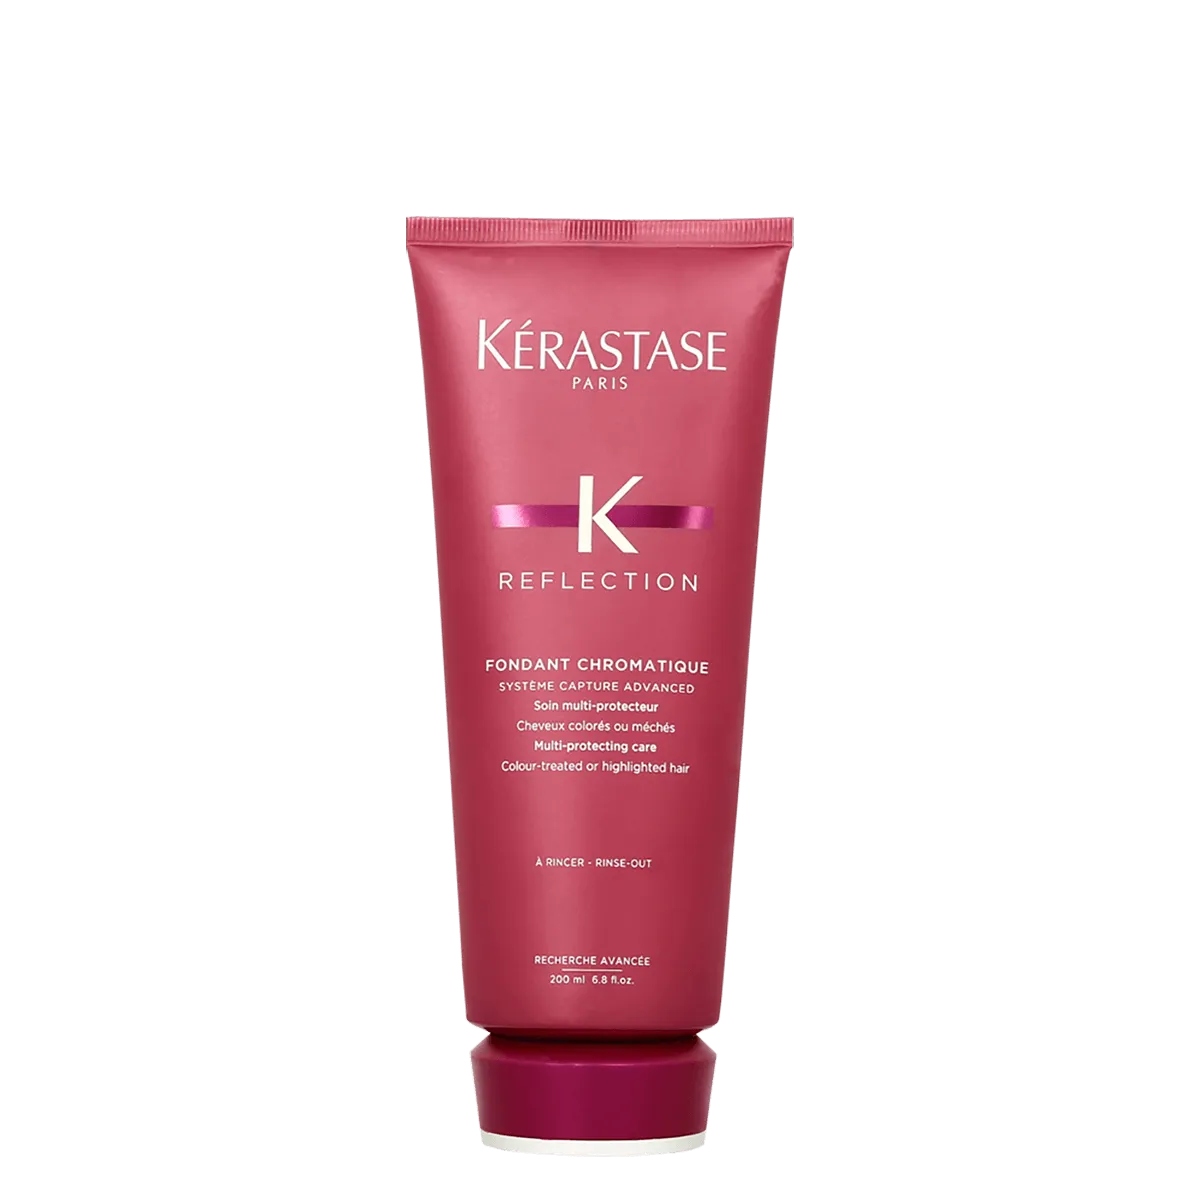 Reflection Fondant Chromatique by Kerastase, the best French conditioner for color-treated hair.